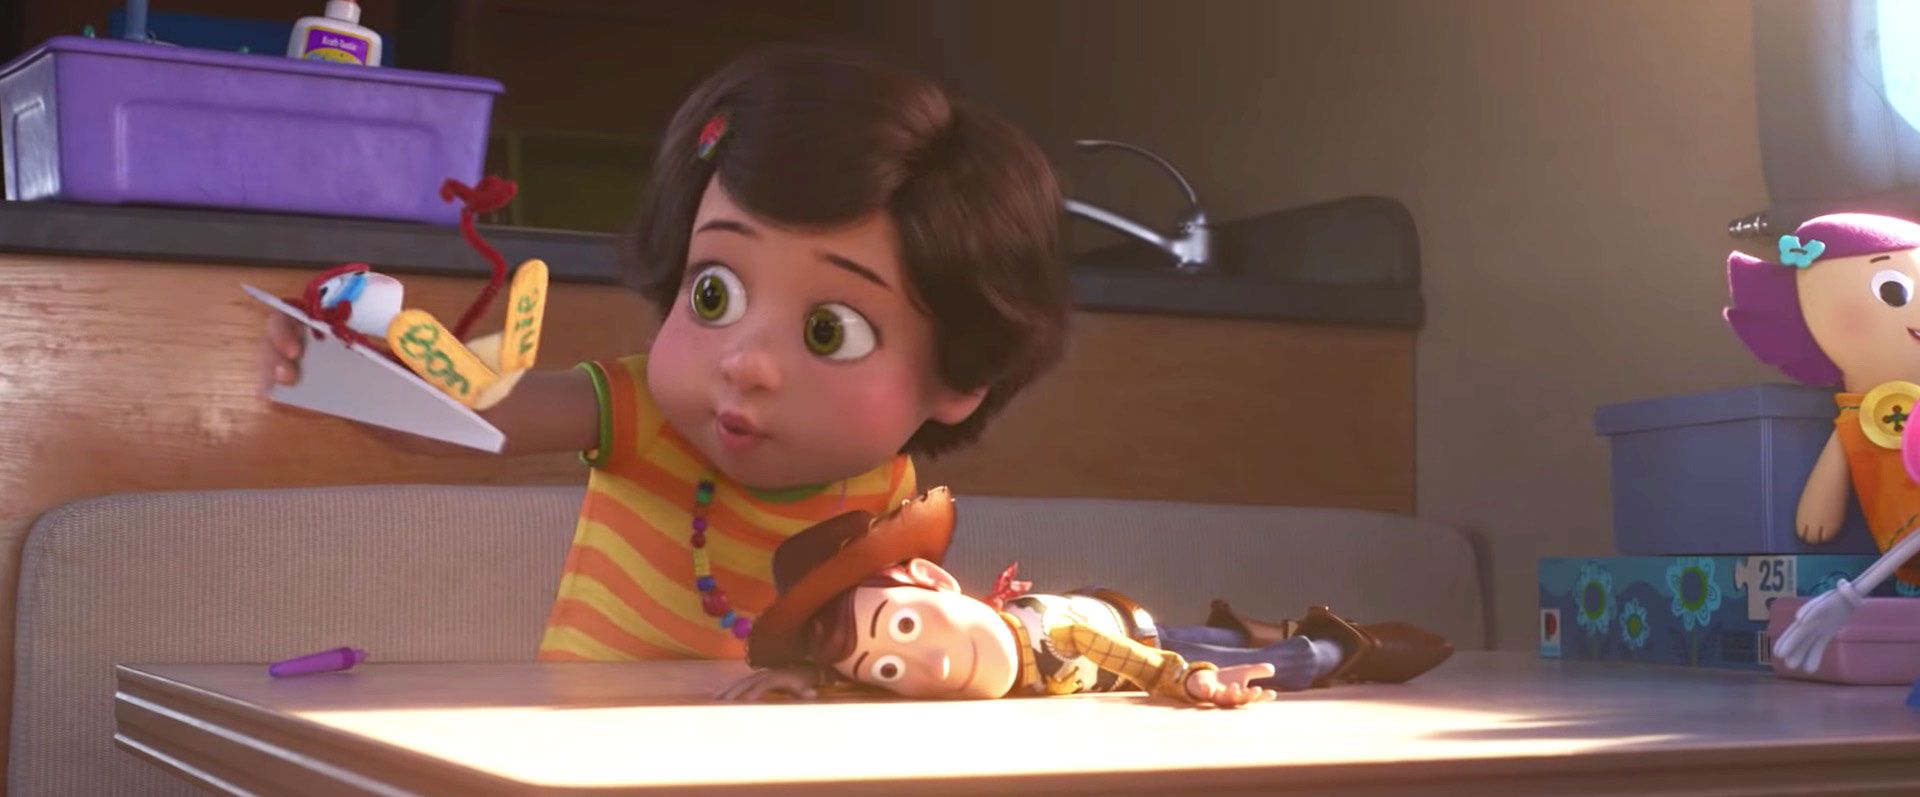 toy story 4 girl characters